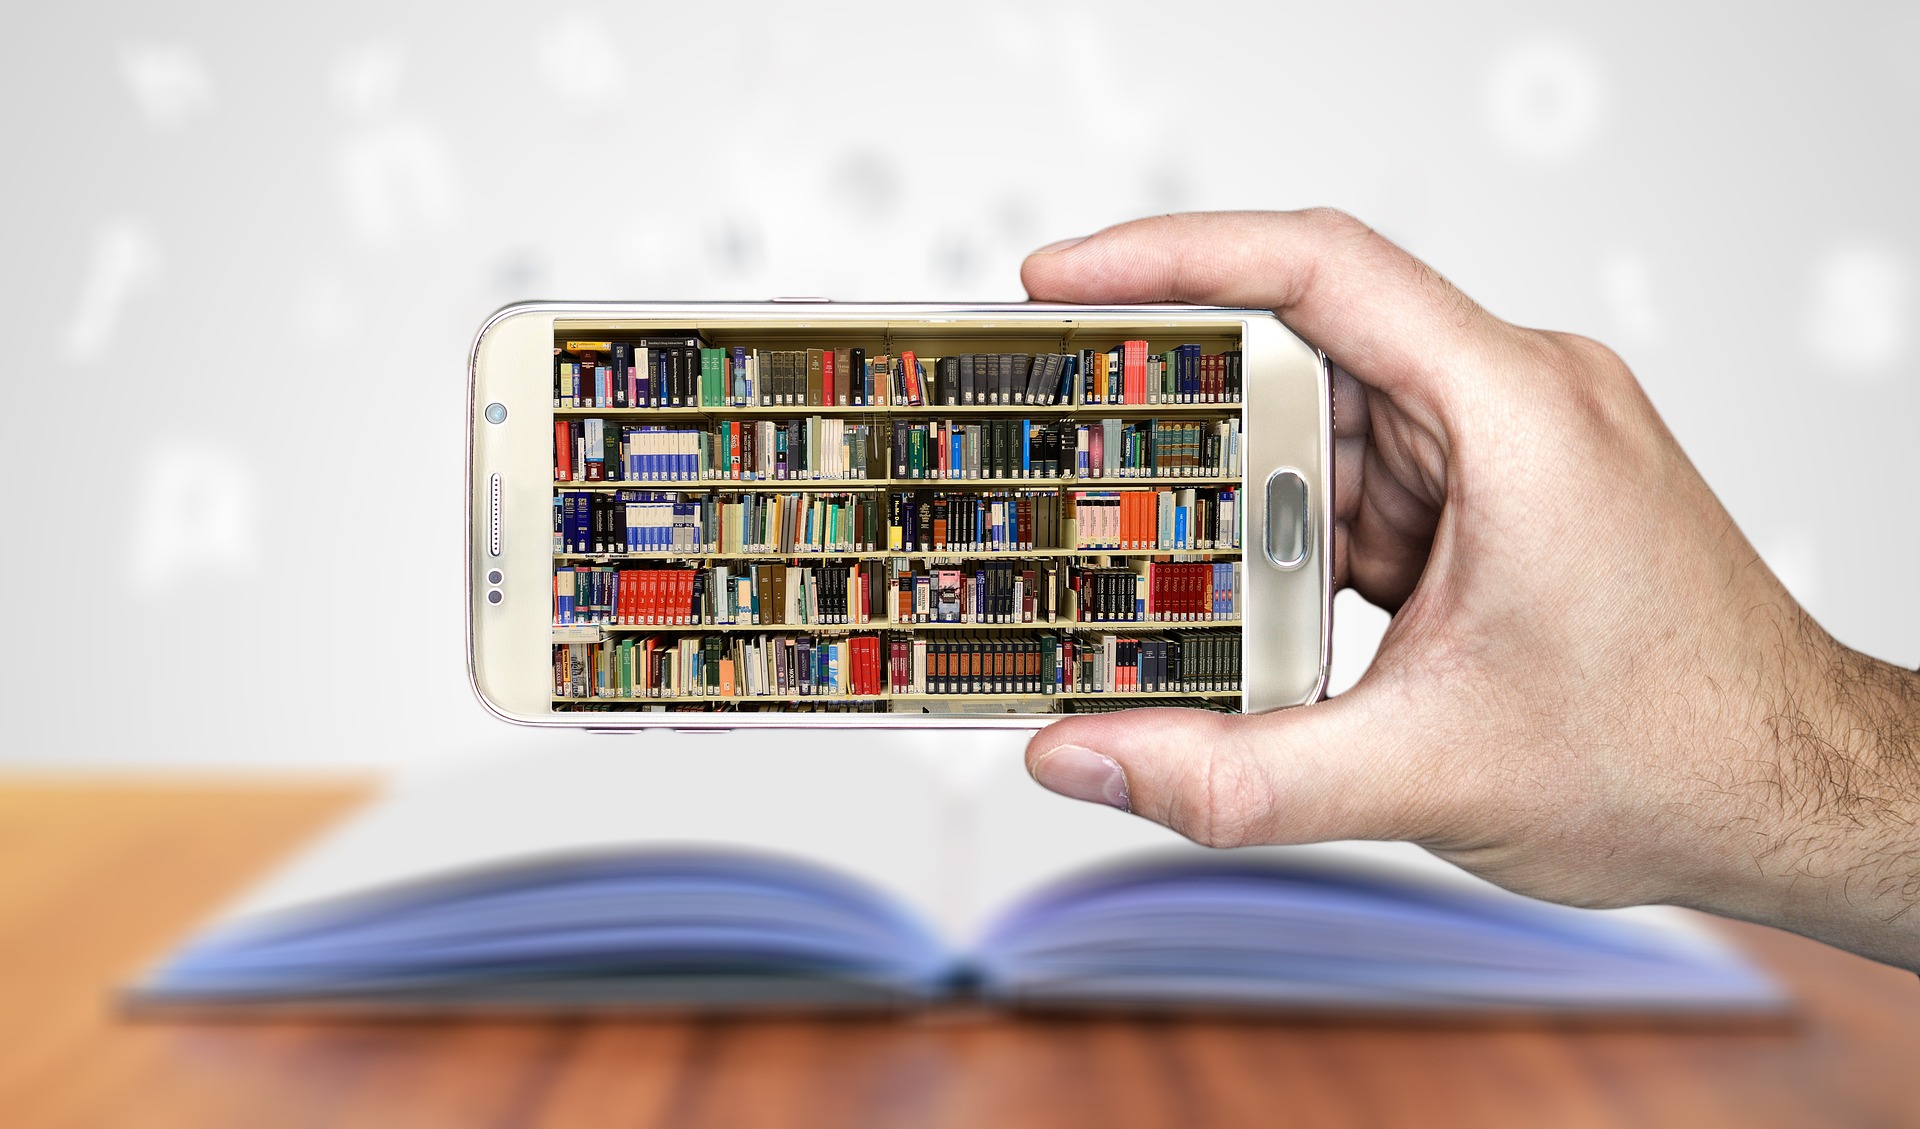 Picture of a hand holding a smart phone that is displaying library shelves of books